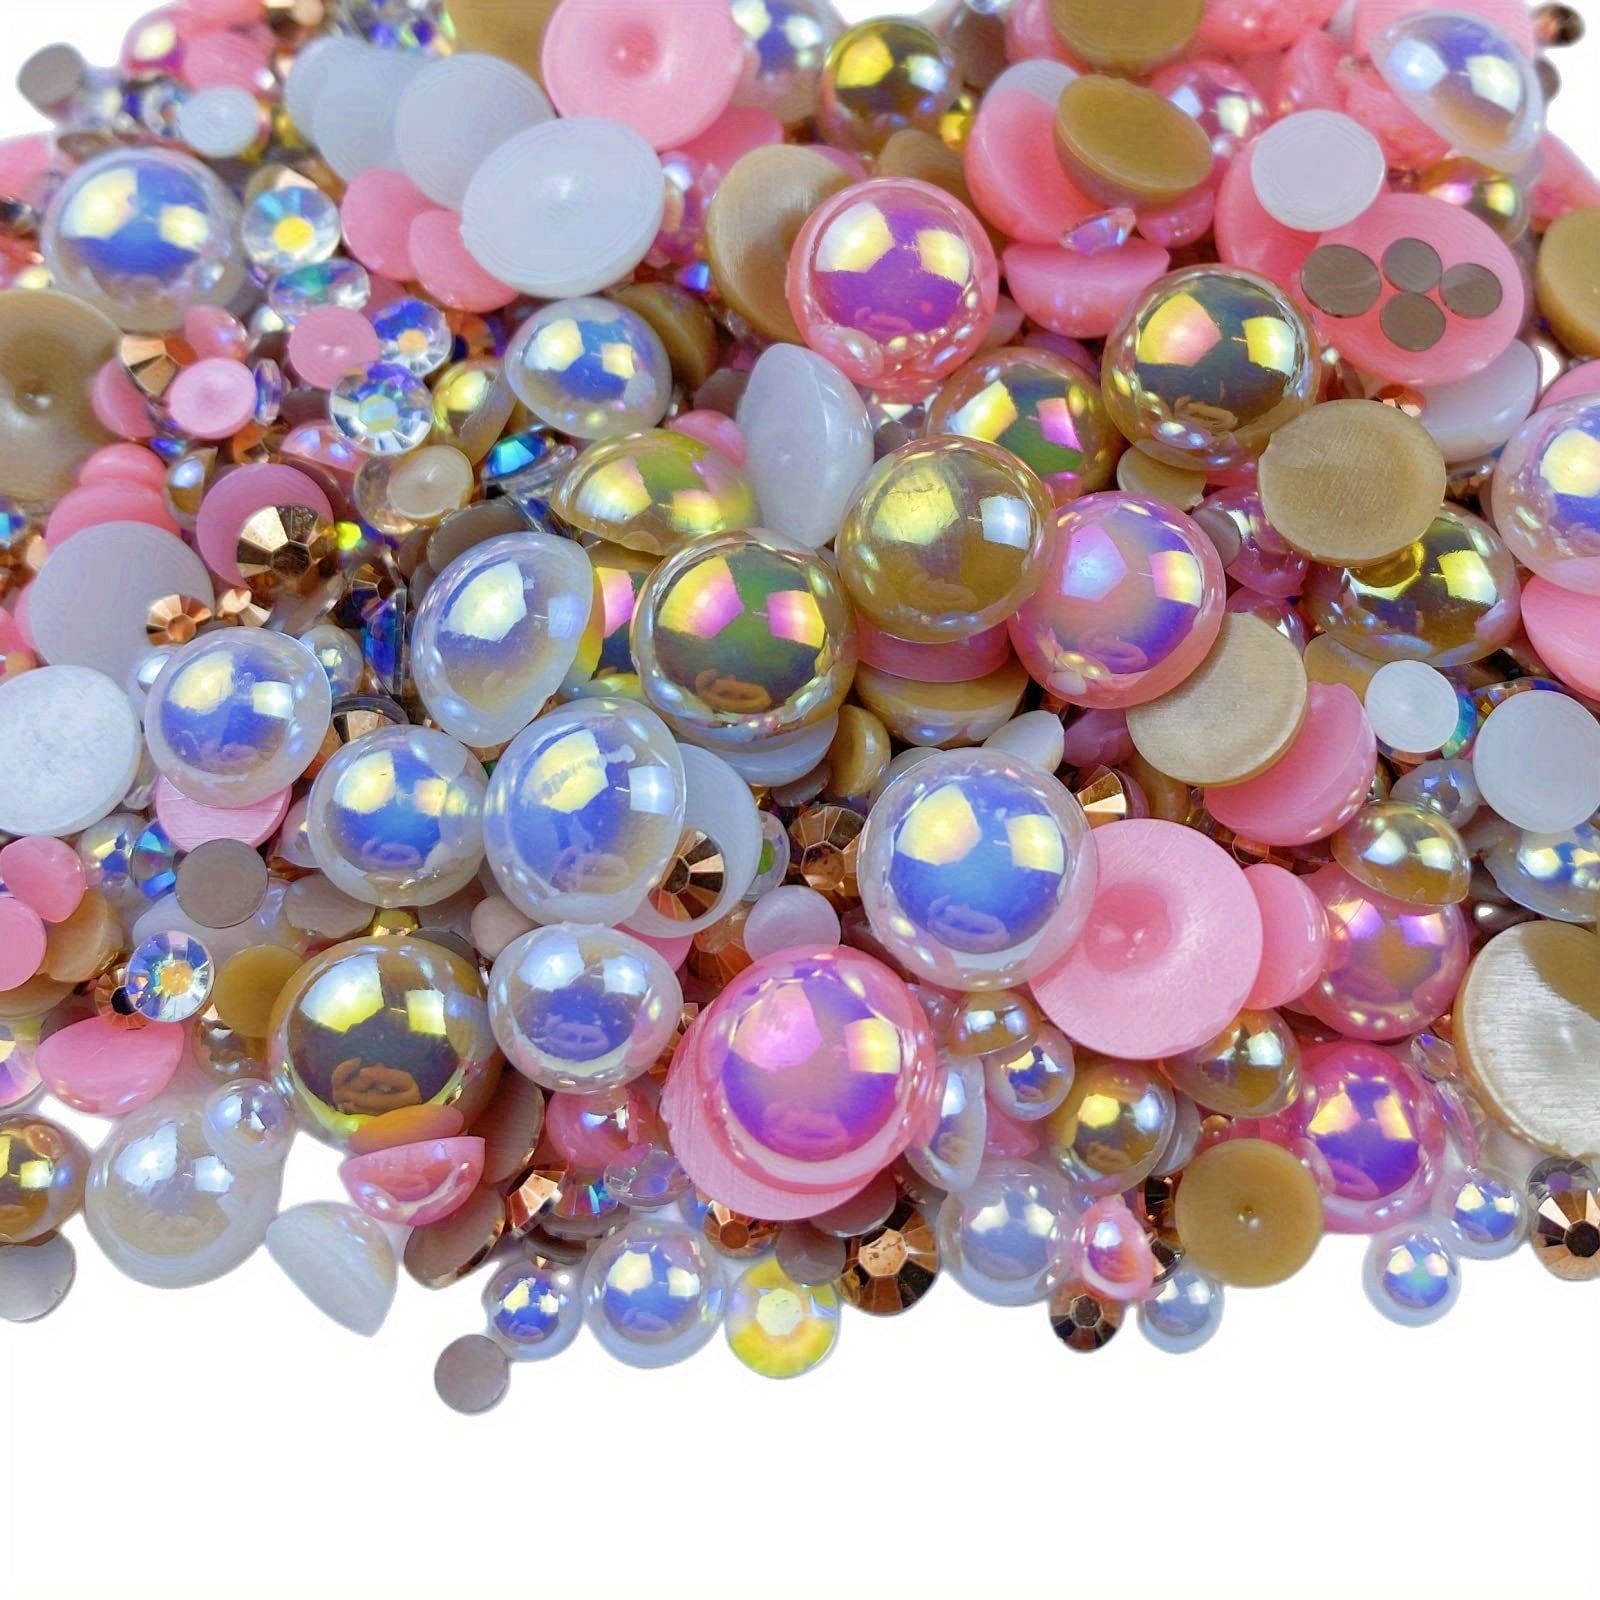 1100pcs Flatback Pearls & Rhinestones, 30g Mixed Size 3mm-10mm Ab Color  Resin Rhinestones In Pink, Blue, And White, Half Round Flatback Pearl  Rhinestones, Suitable For Nail Art, Face Art, Crafts, Jewelry Making